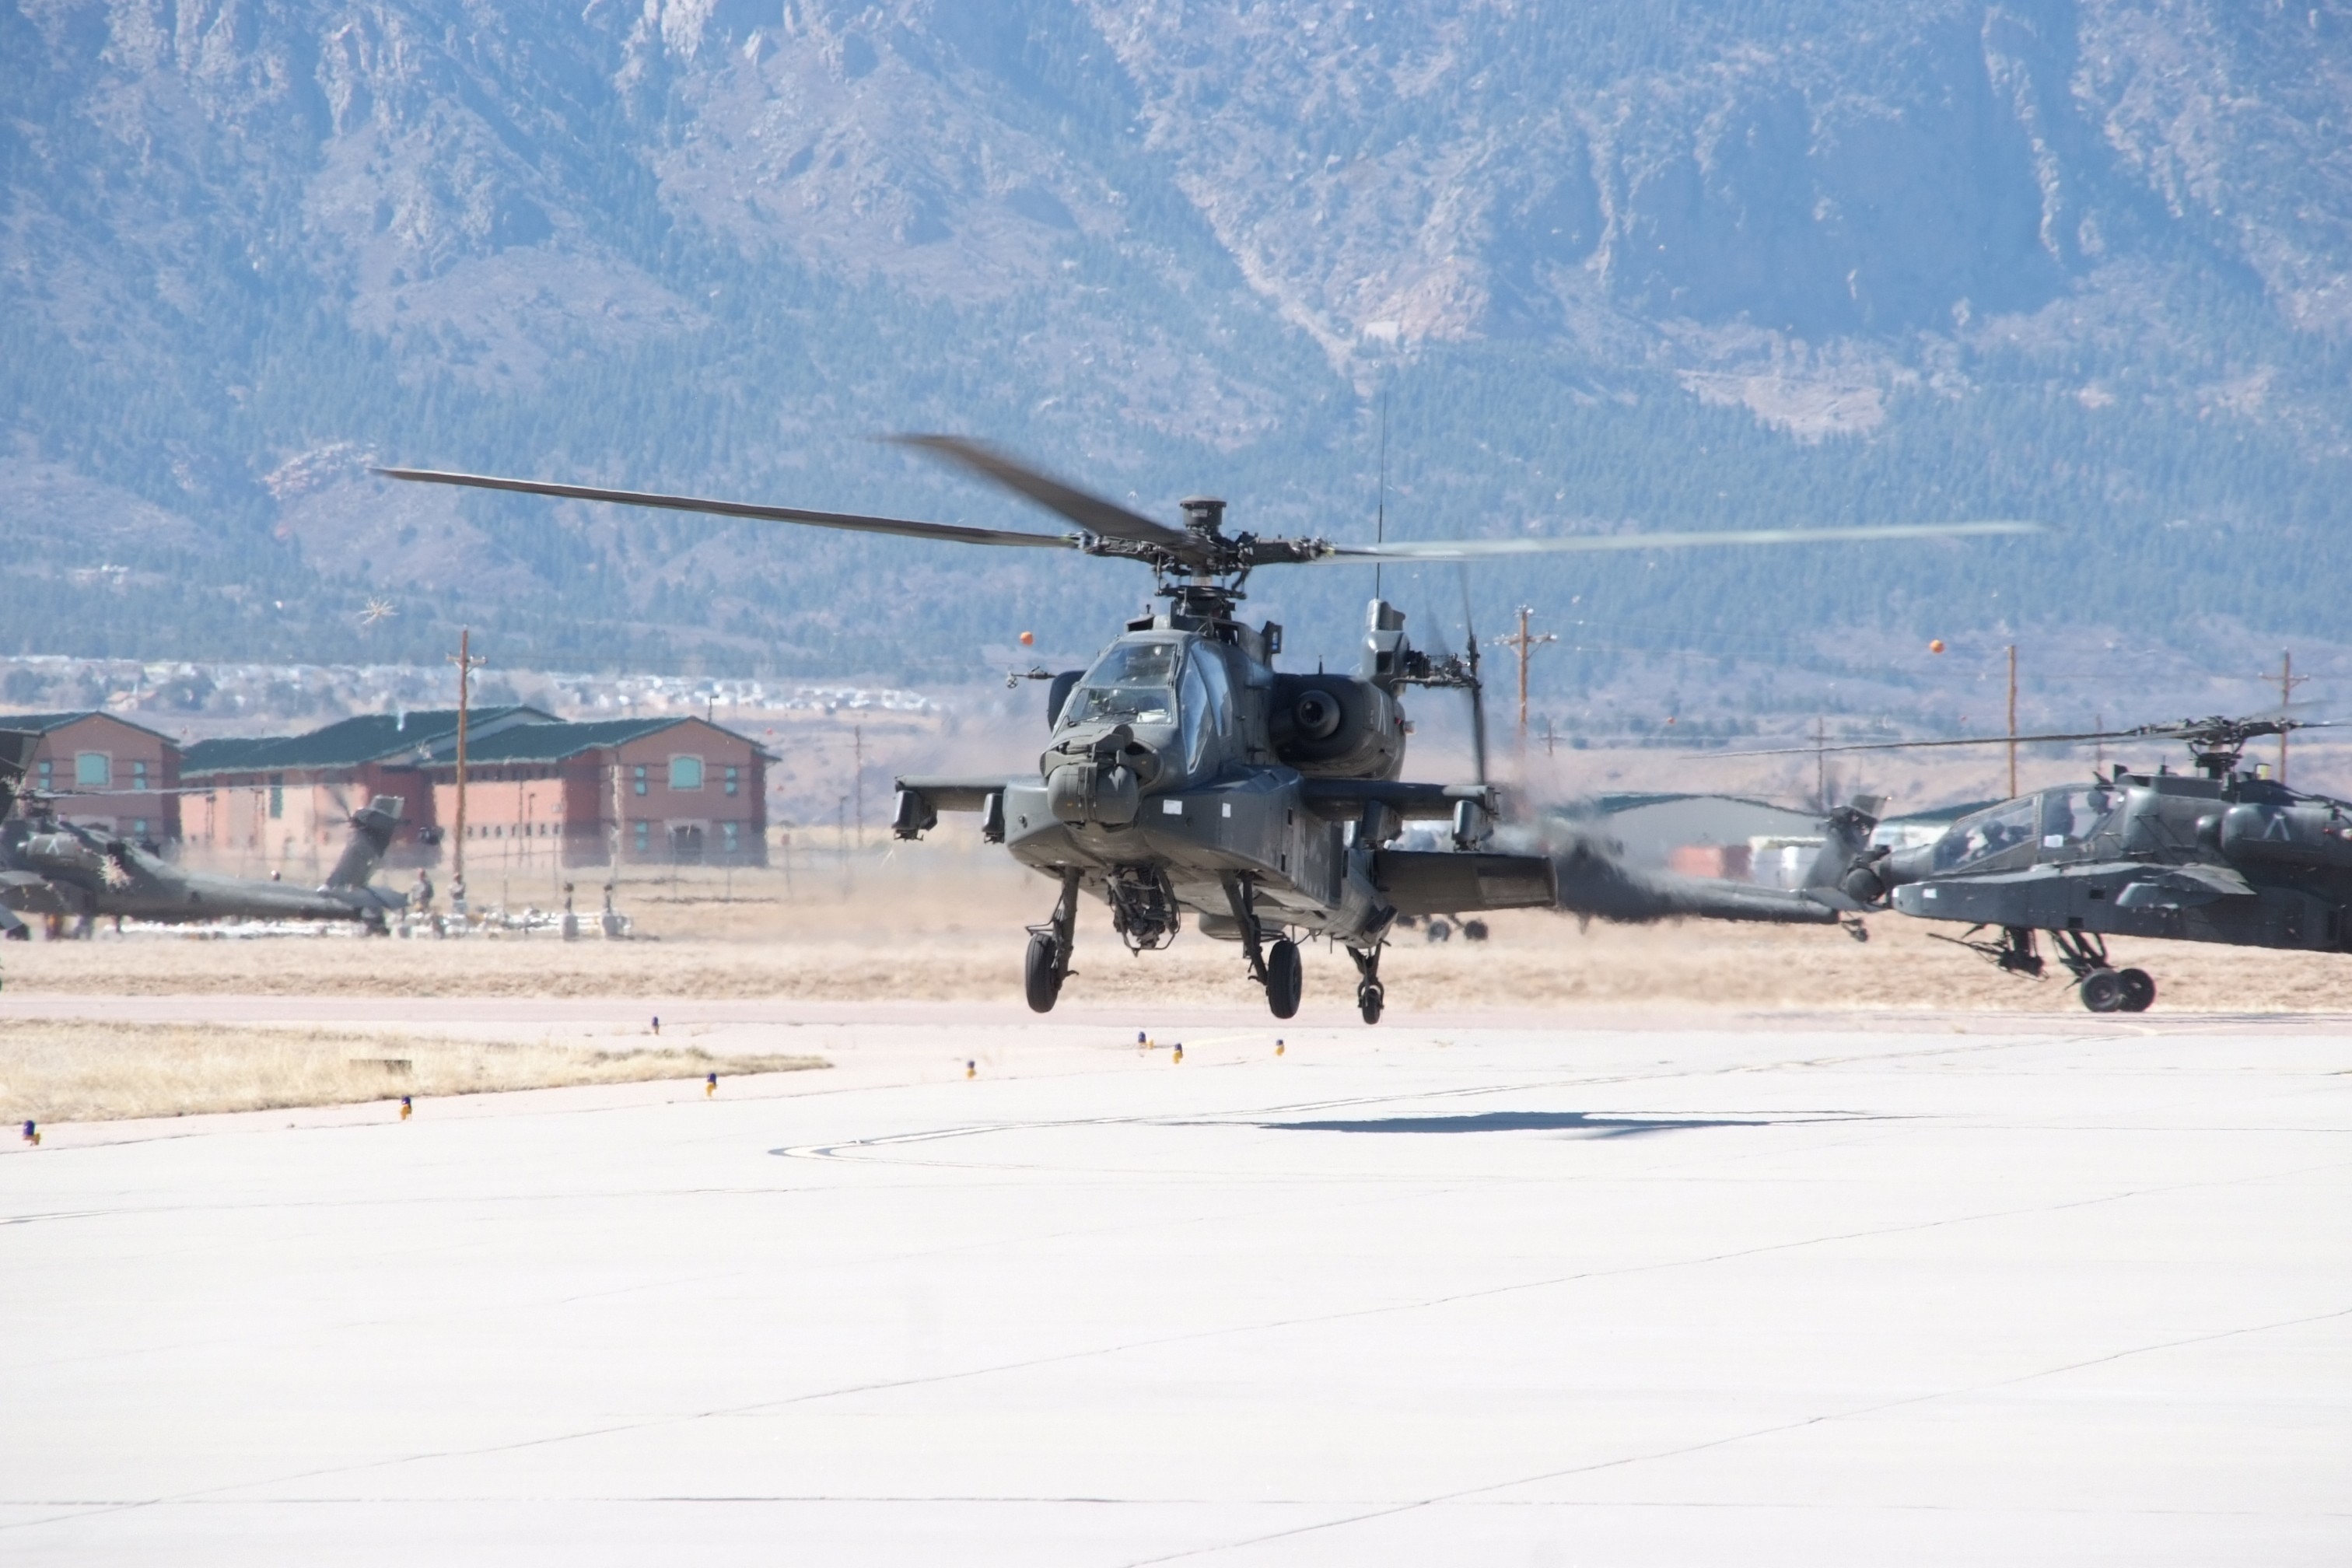 Fort Carson new home to Apaches | Article | The United States Army